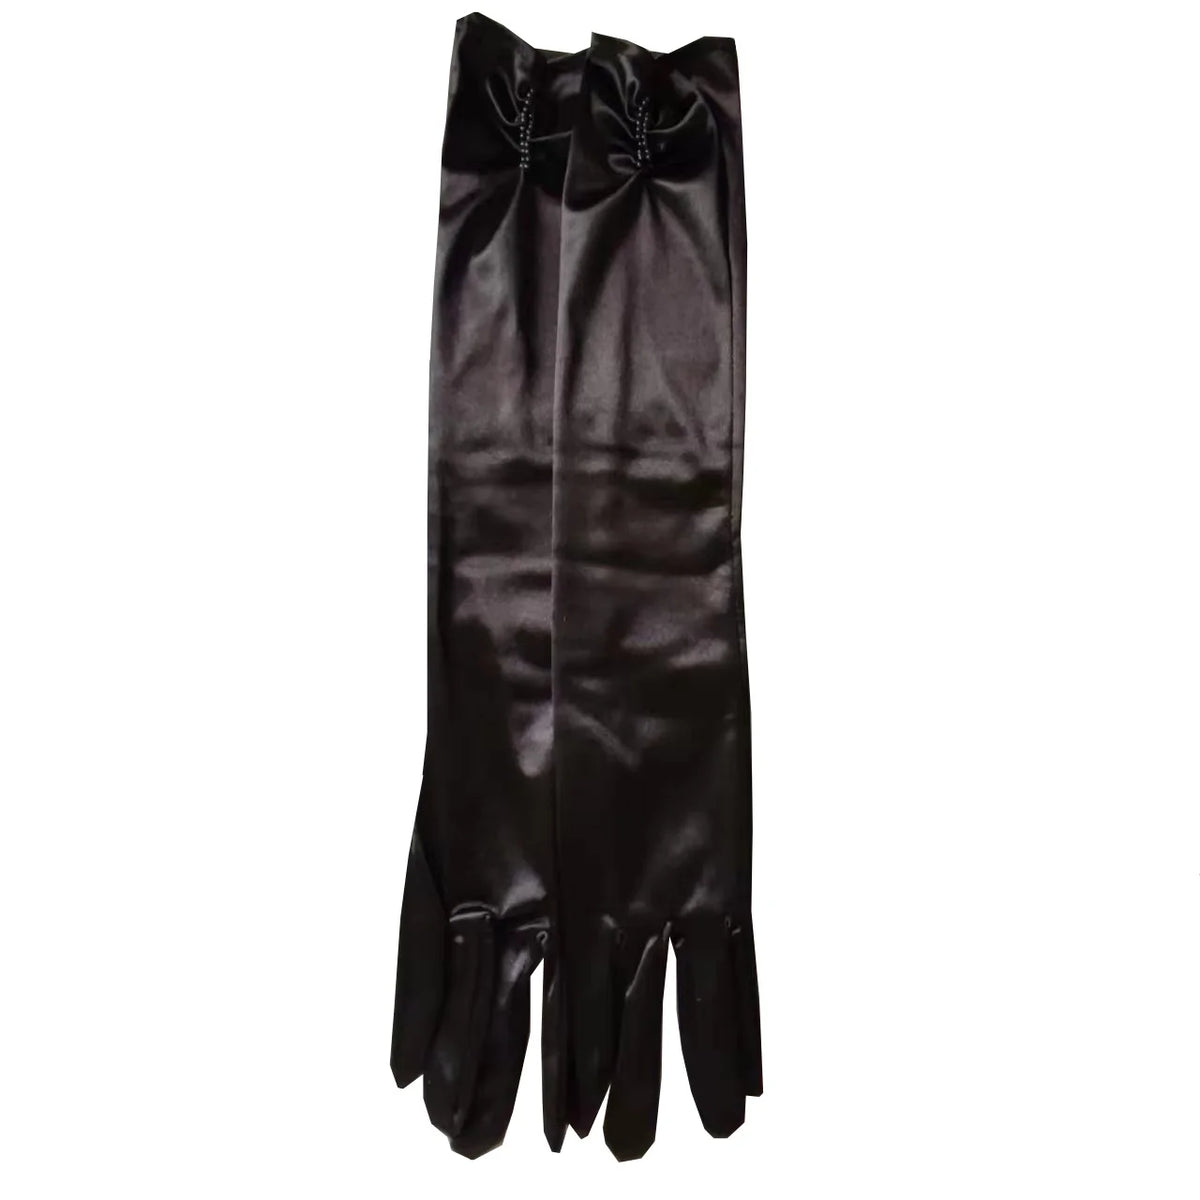 a pair of black leather gloves on a white background